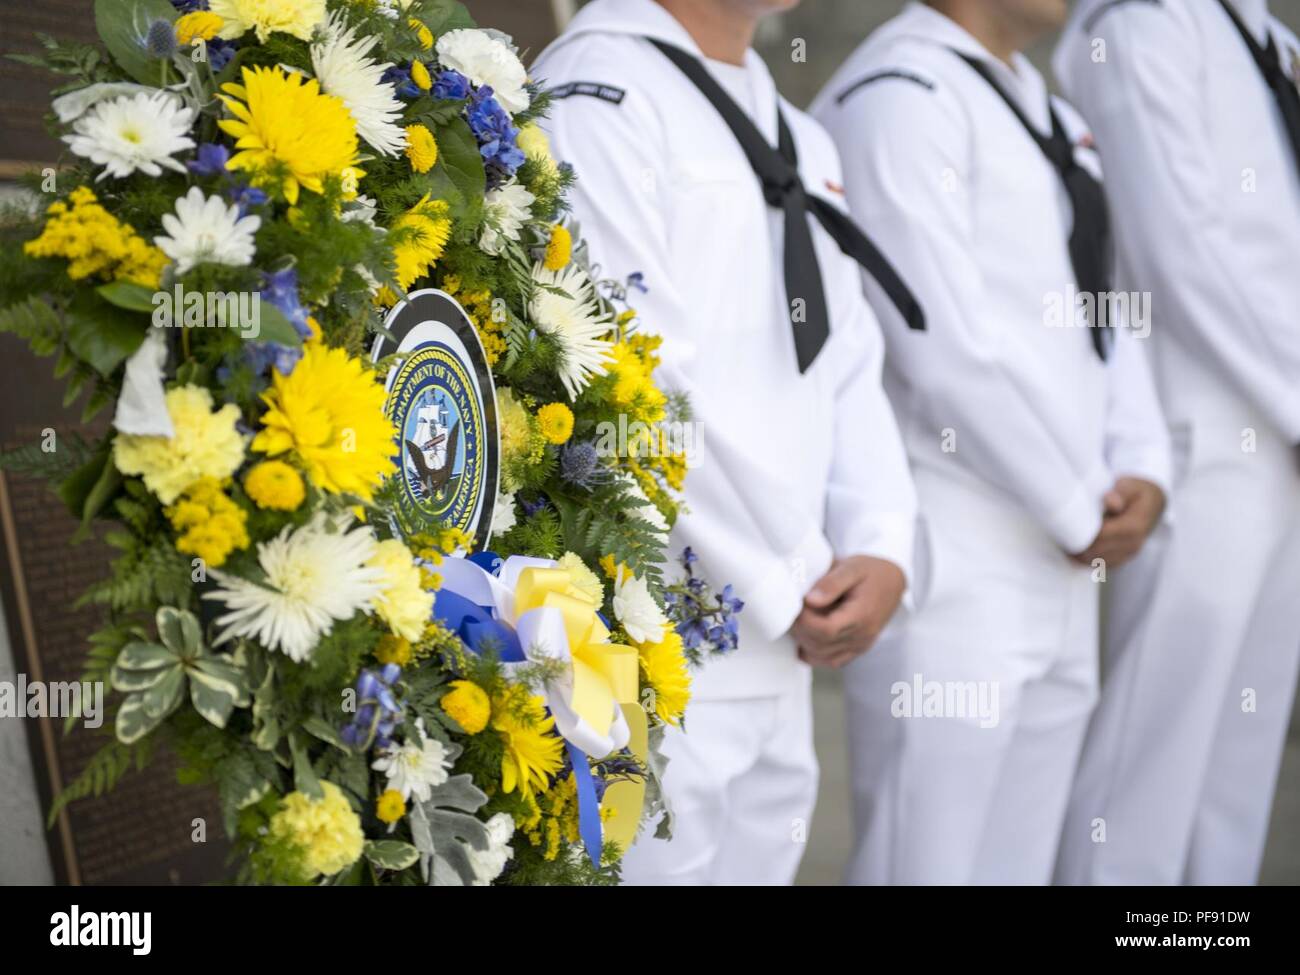 Va.  (June 6, 2018) Sailors from Assault Craft Unit Two lay a wreath during the 74th D-Day commemoration ceremony held at the National D-Day Memorial. The Memorial resides in Bedford, Va. - the town that suffered the highest per-capita loss of lives in the D-Day invasion over any community in the allied forces. Stock Photo